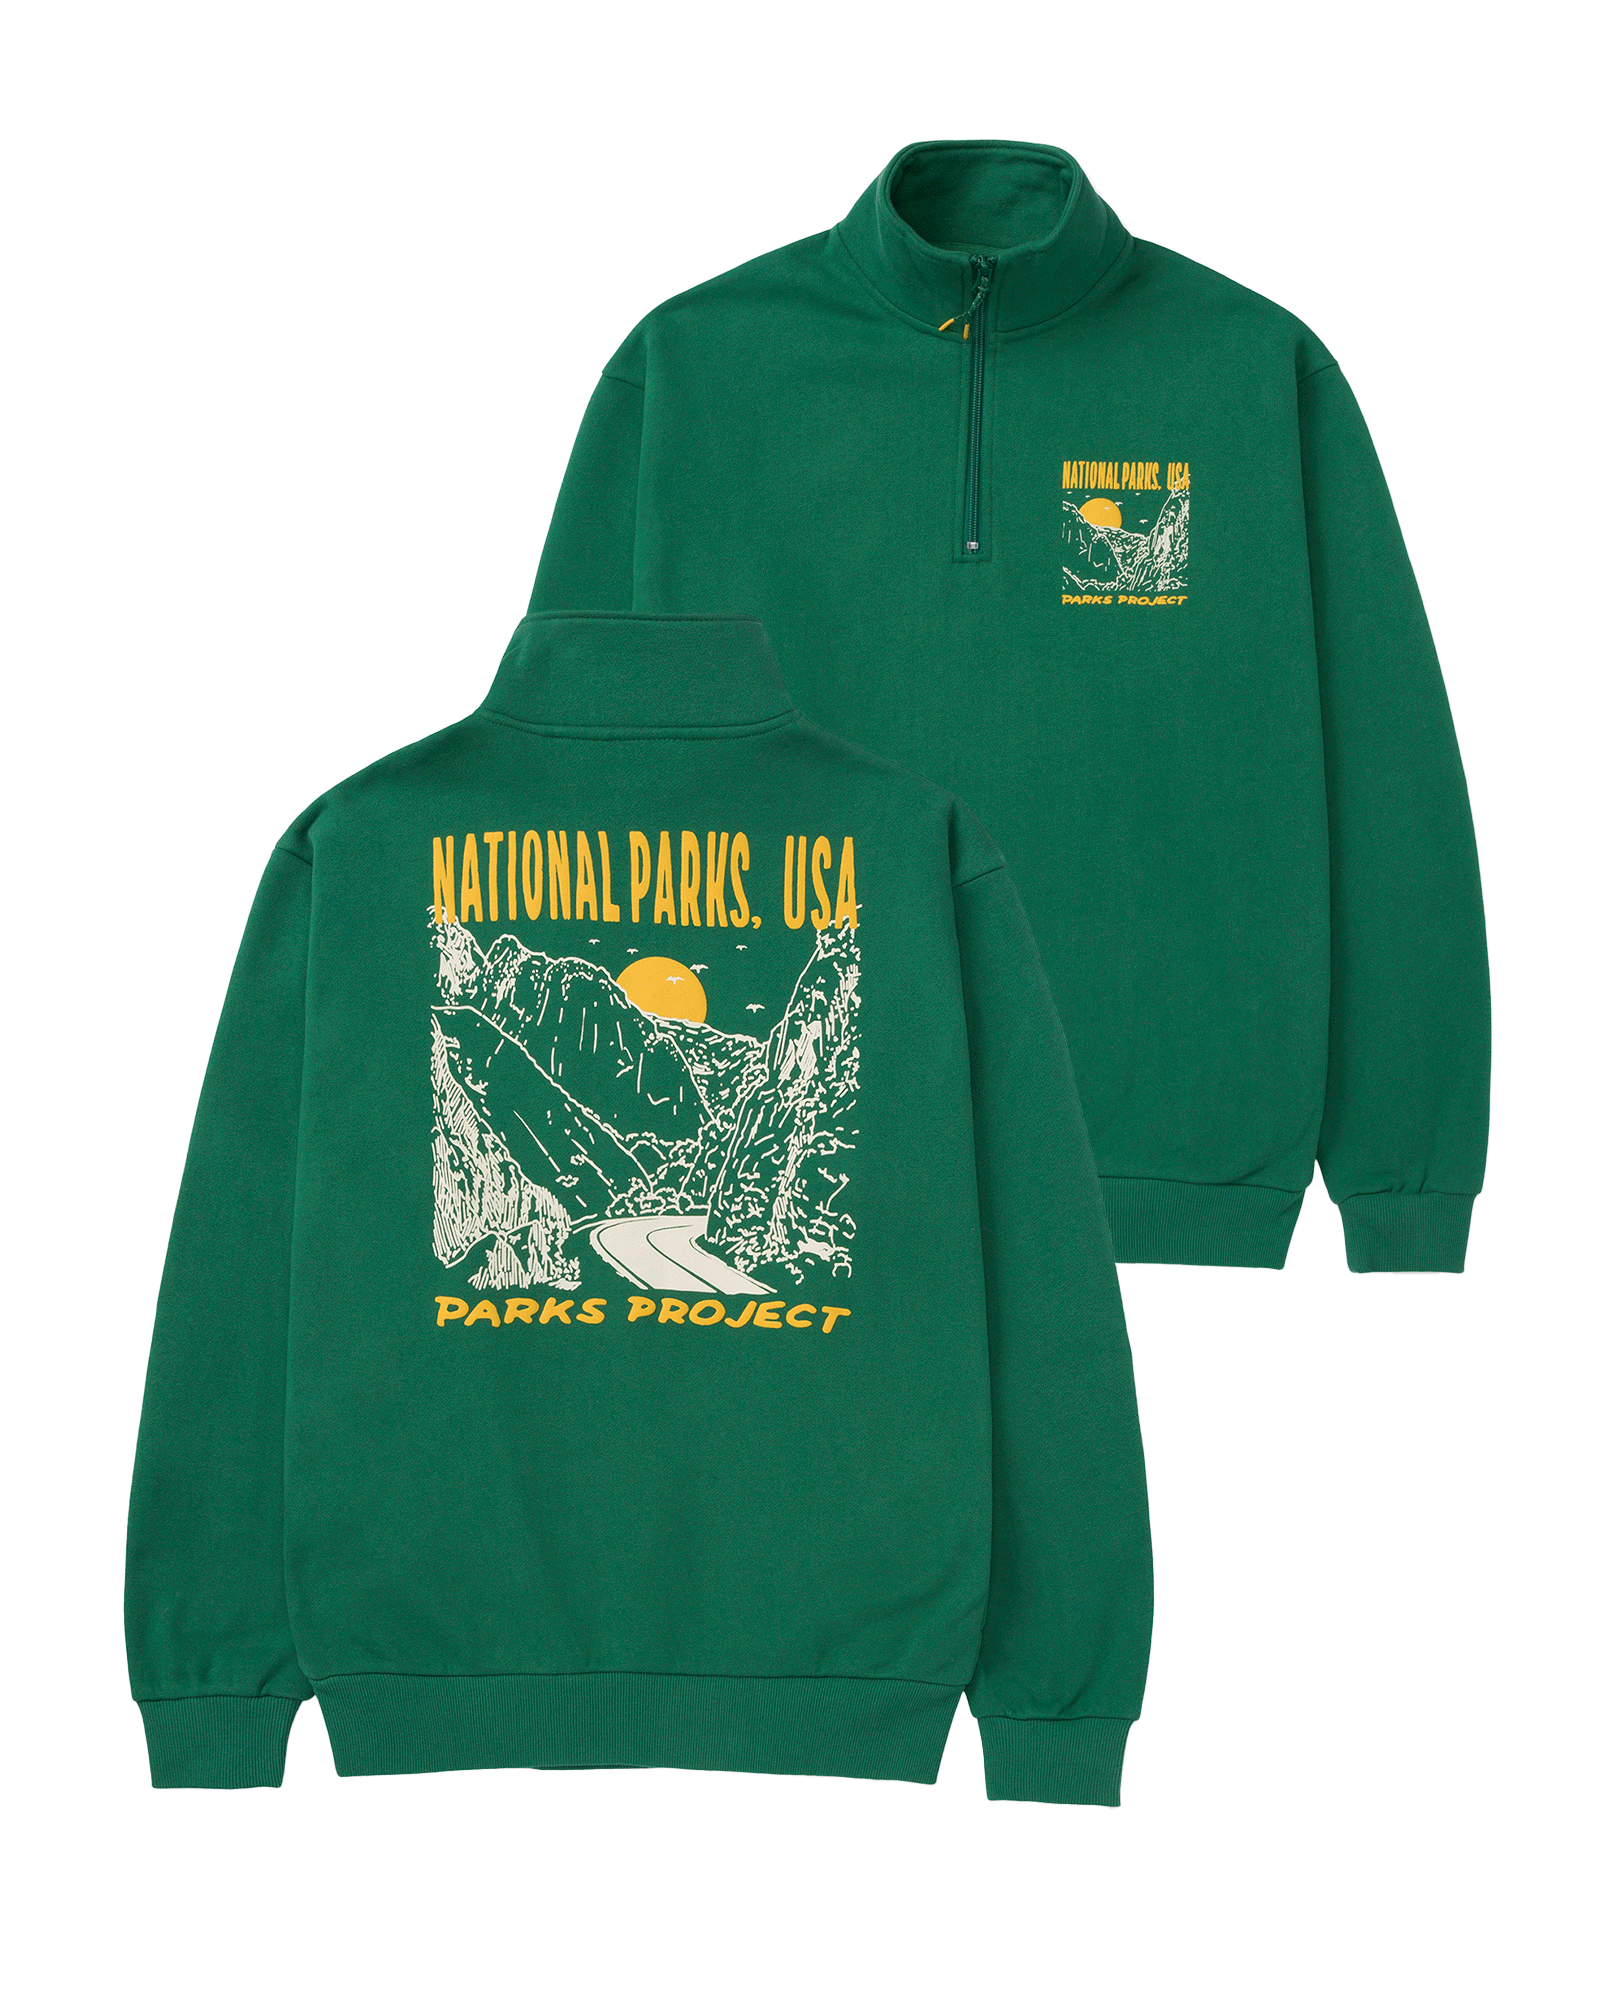 Shop Yellowstone Geysers Trail High Pile Fleece Inspired by